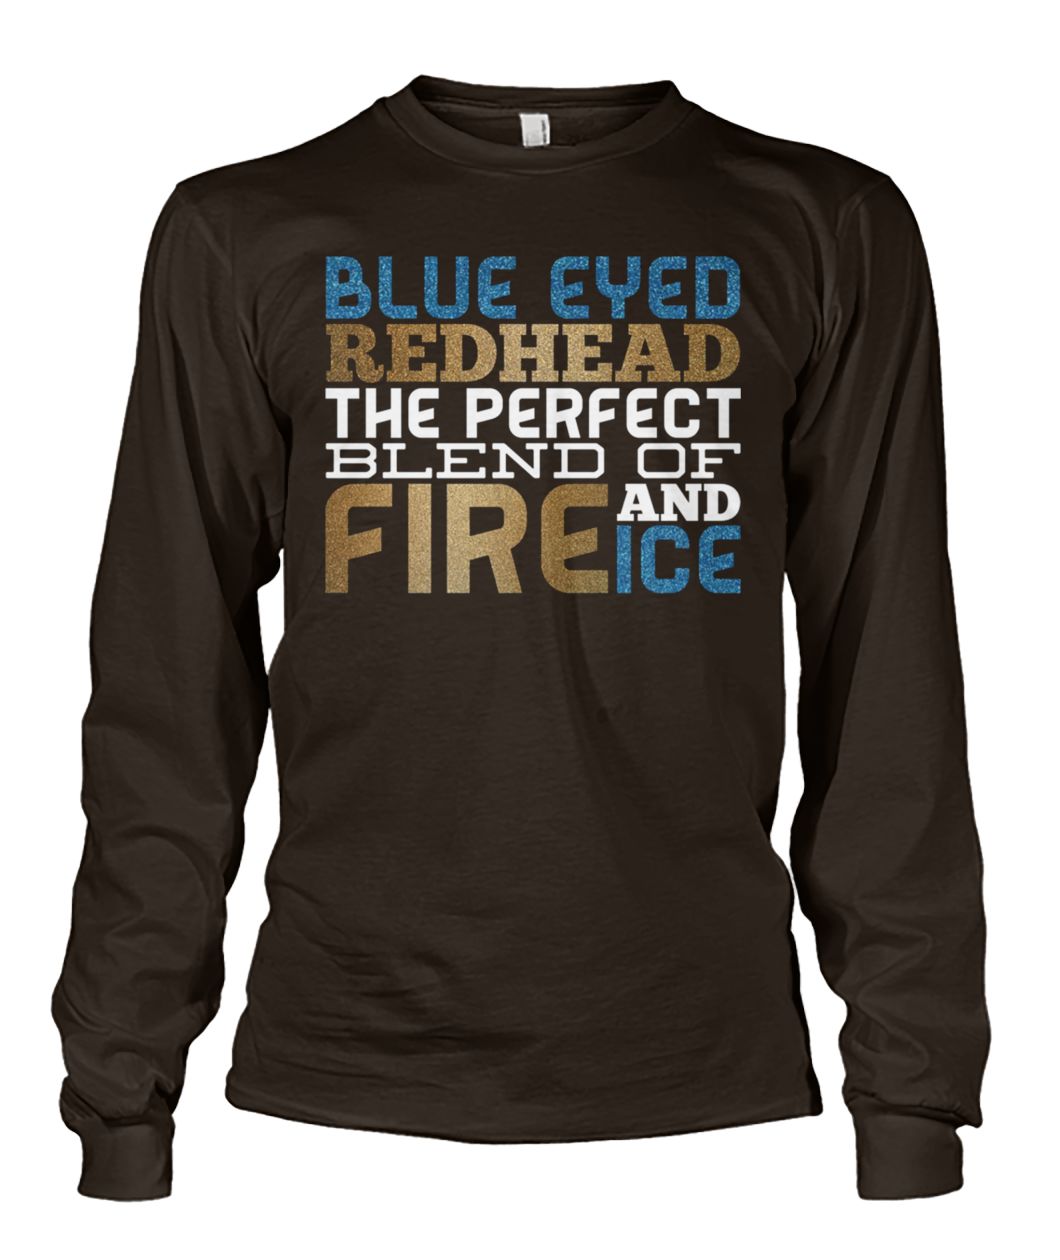 Blue eyed redhead the perfect blend of fire and ice longsleeve tee